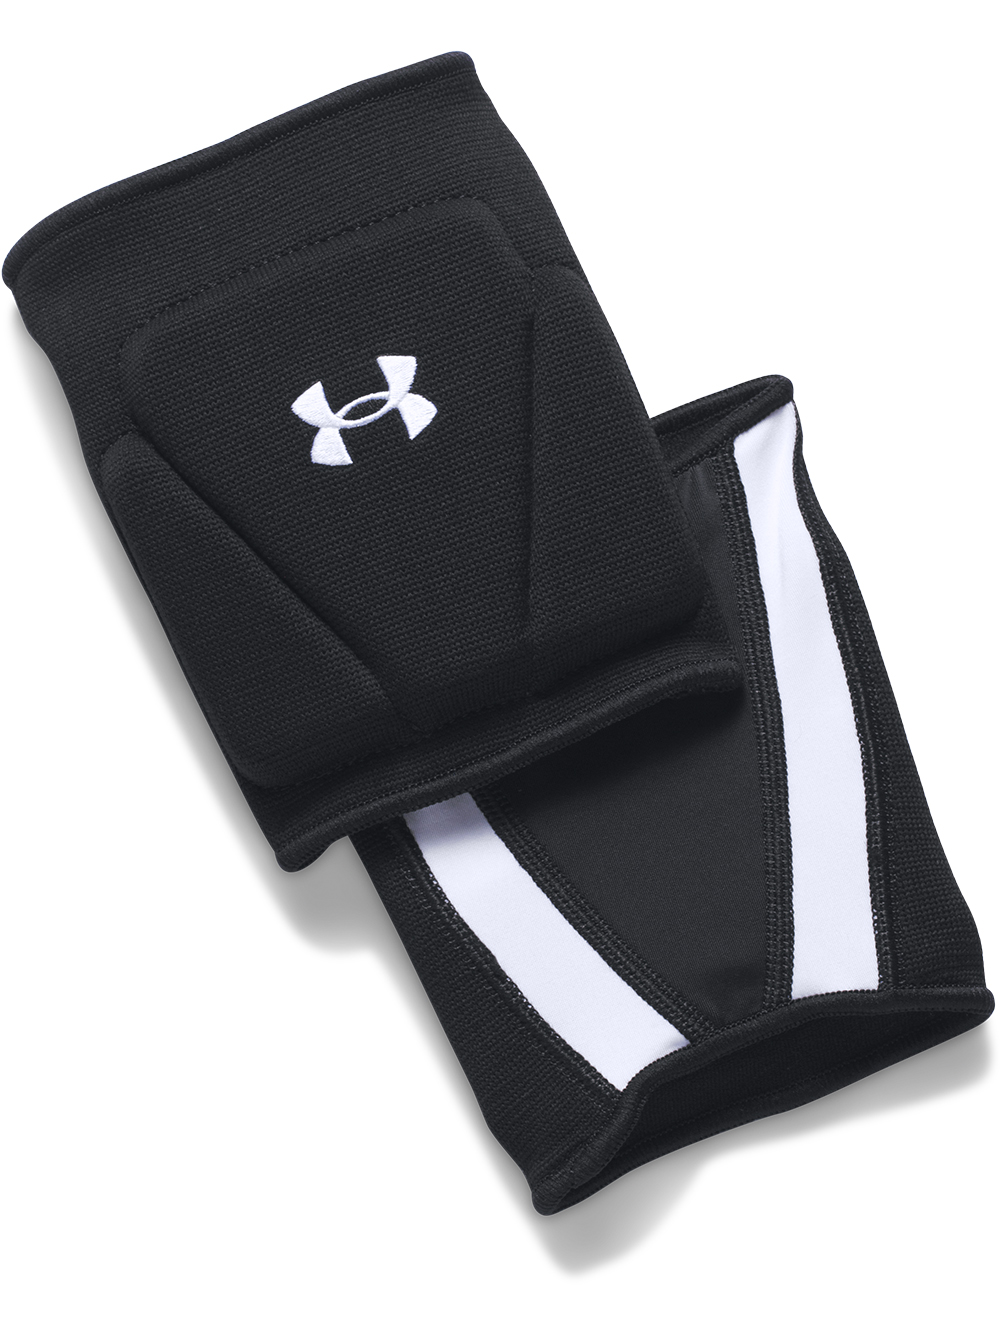 Under Armour Strive Kneepads | Midwest Volleyball Warehouse